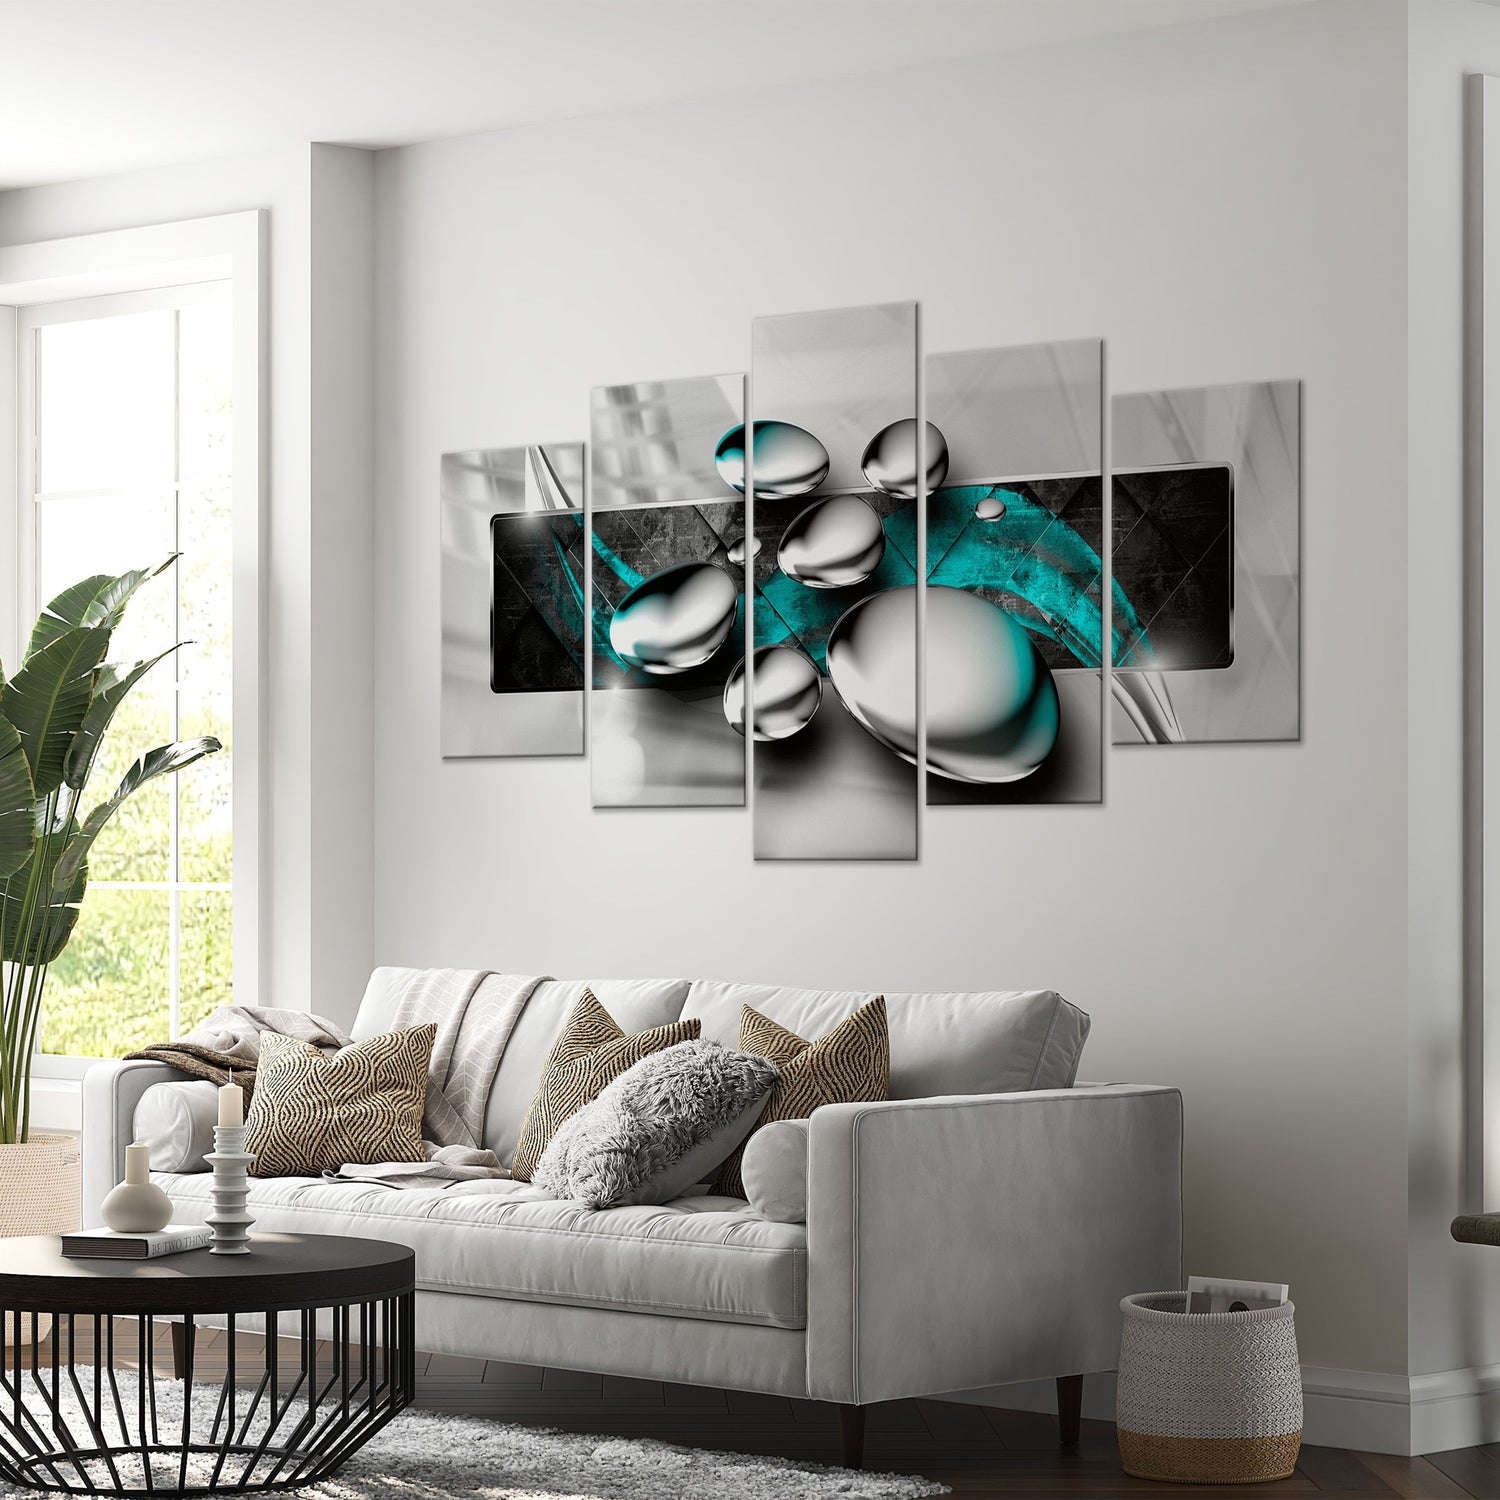 Glamour Canvas Wall Art- Shiny Stones Turquoise - 5 Pieces